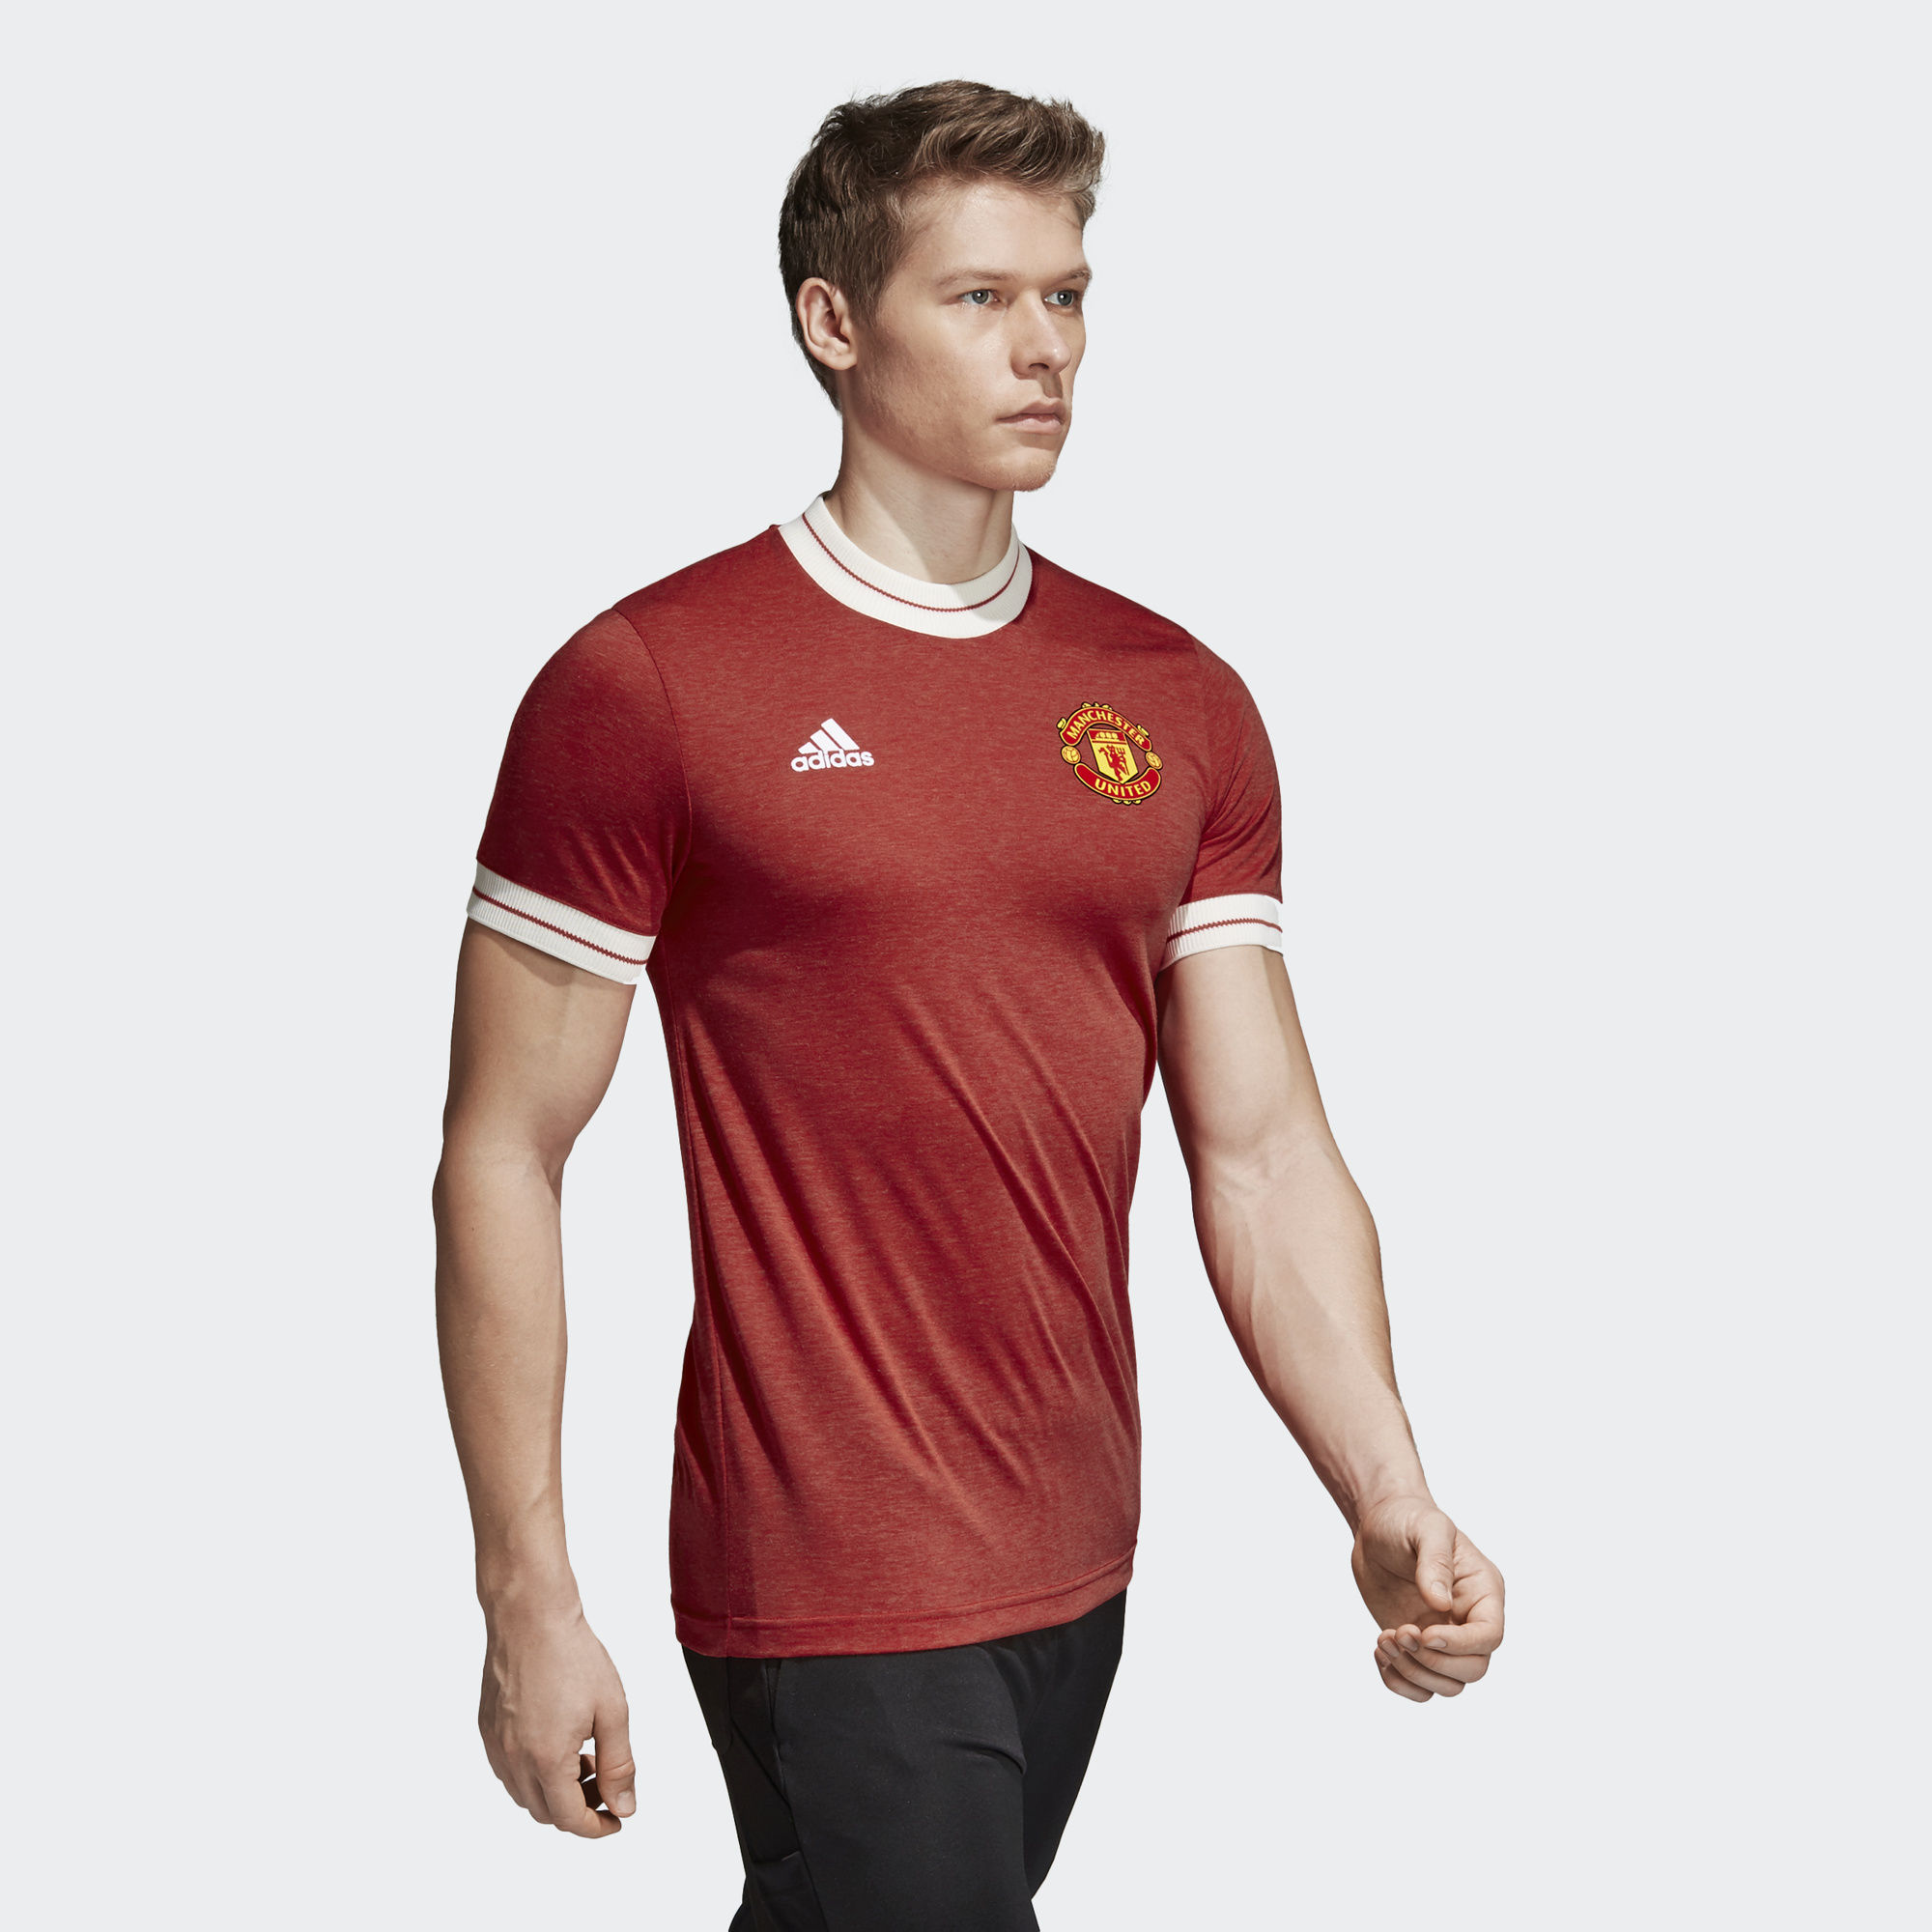 adidas manchester united icon jersey